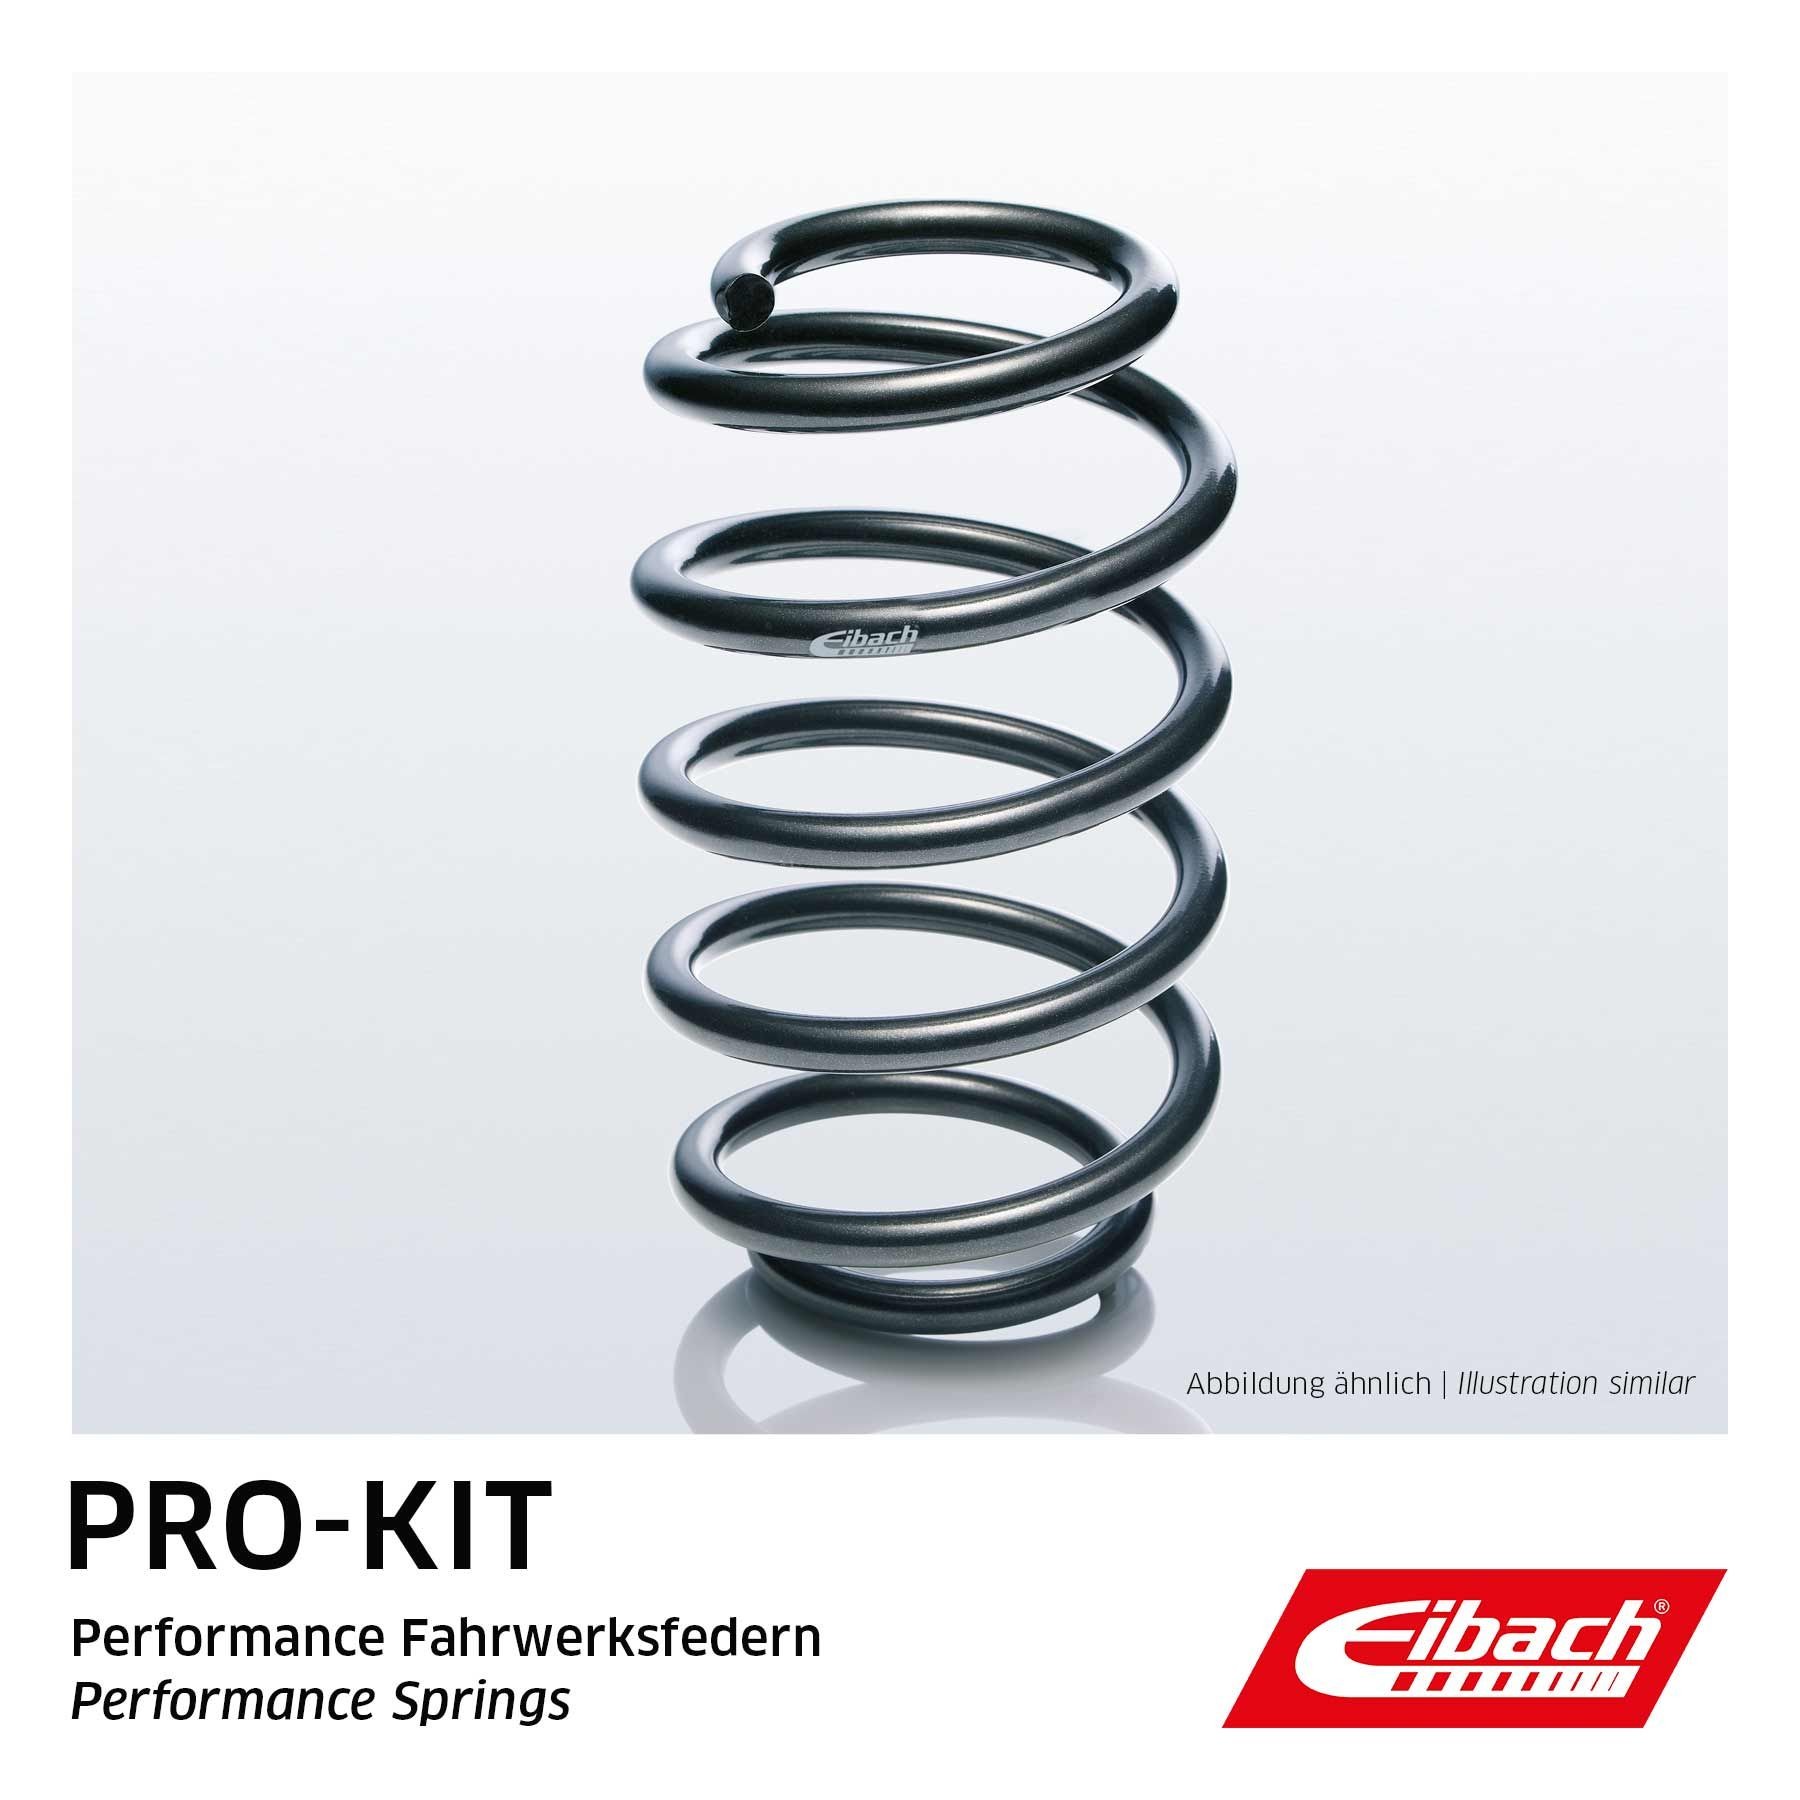 EIBACH Suspension spring rear and front VW Touran (5T1) new F11-15-021-02-VA